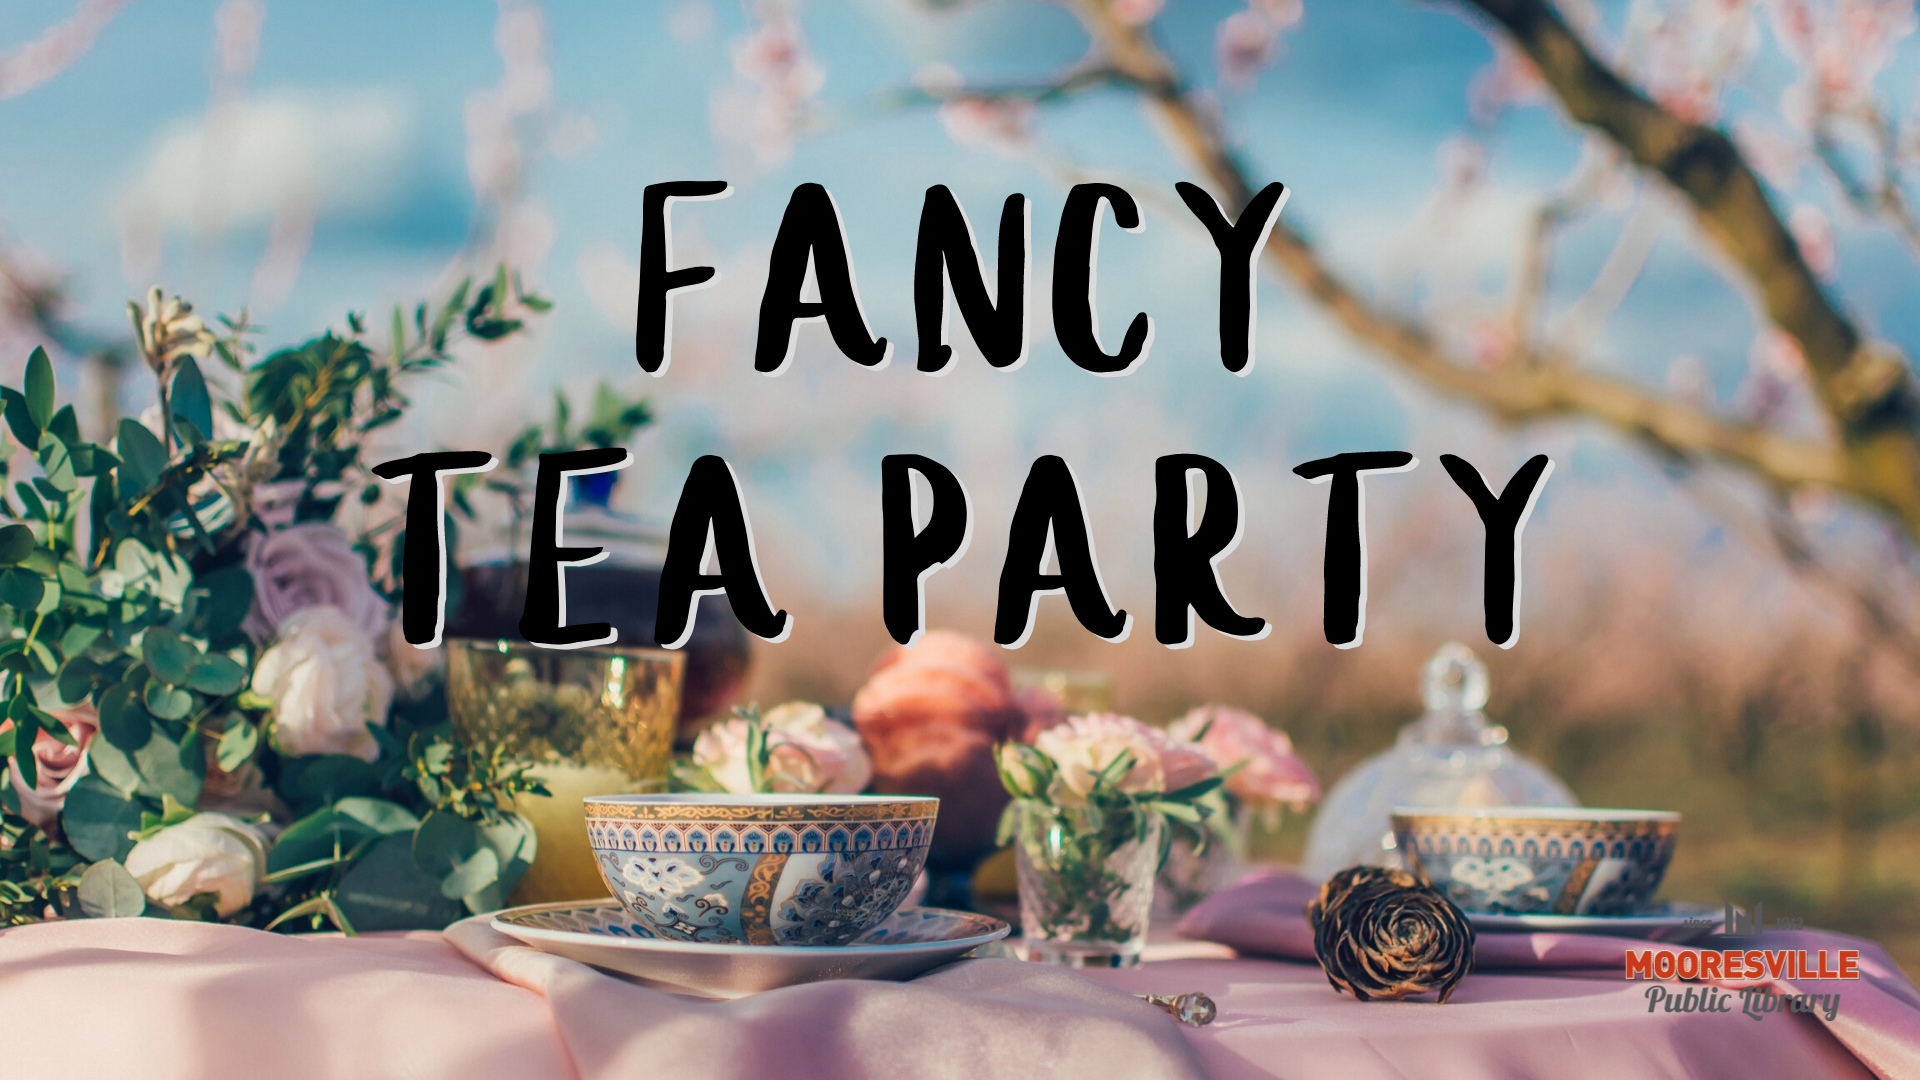 Text reads Fancy Tea Party over image of an outdoor tea setting